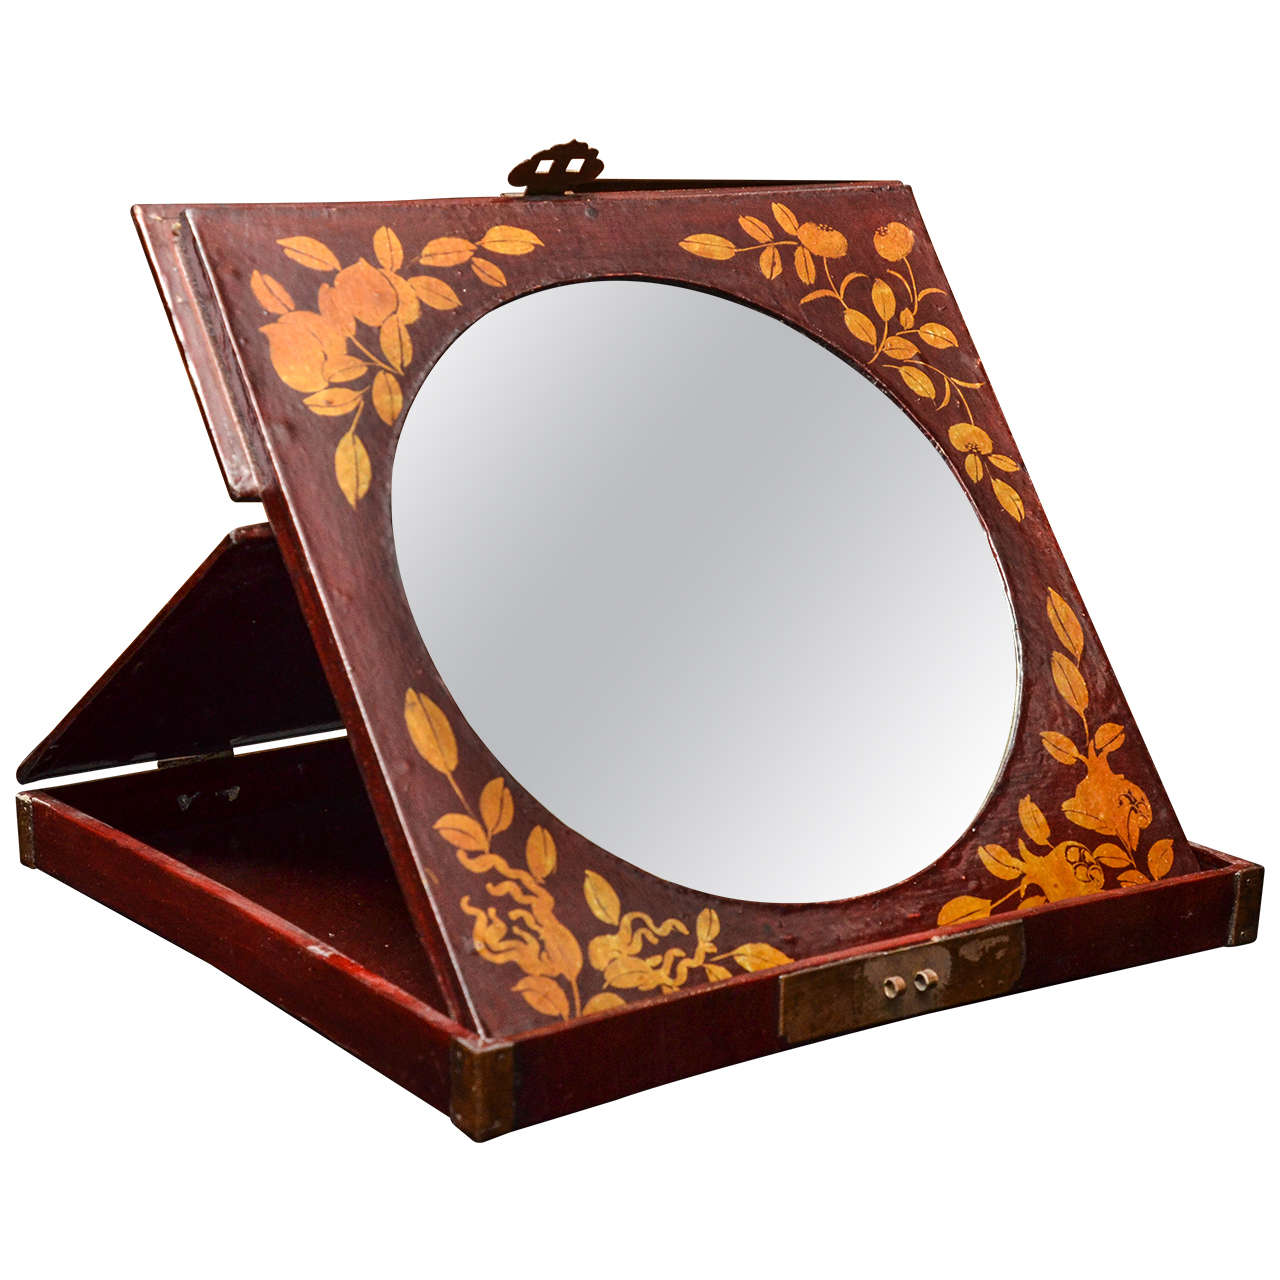 Turn of the Century Chinese Lacquered and Golden Painted Folding Vanity Mirror